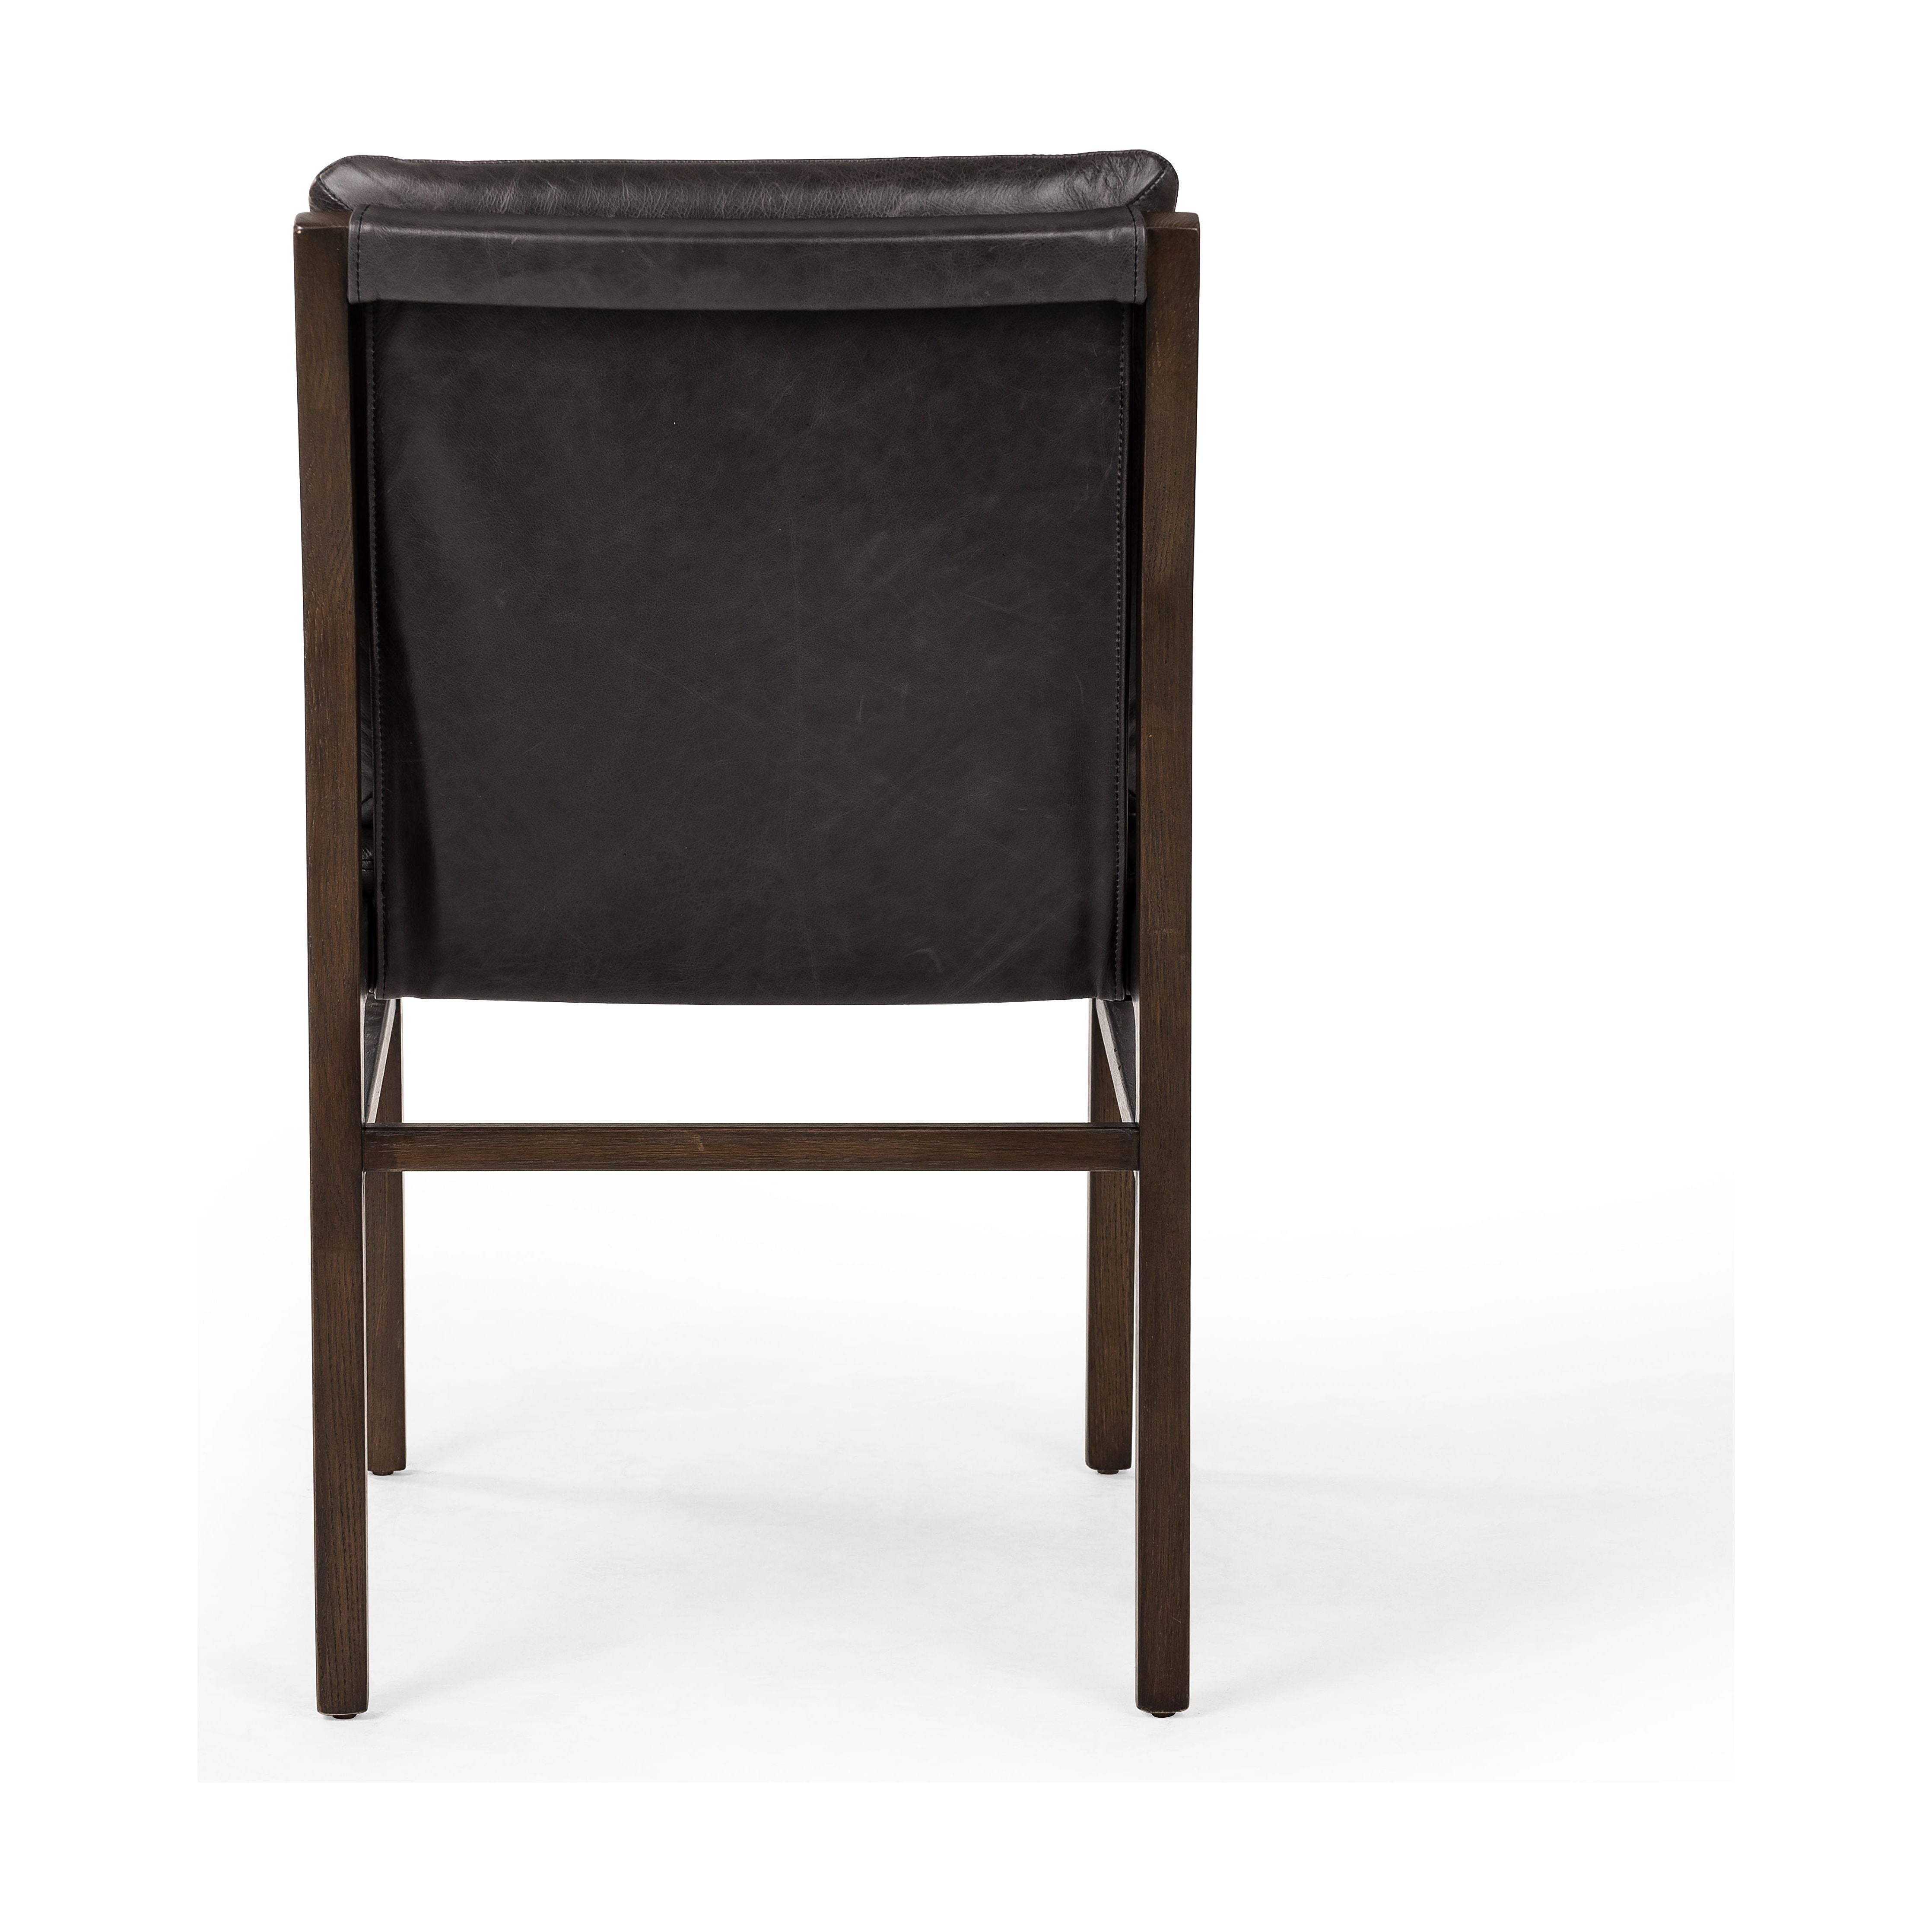 Modern and transitional, burnt oak nettlewood frames this armless dining chair. Finished with a top-grain leather exclusive to Four Hands. Amethyst Home provides interior design, new construction, custom furniture, and area rugs in the Seattle metro area.